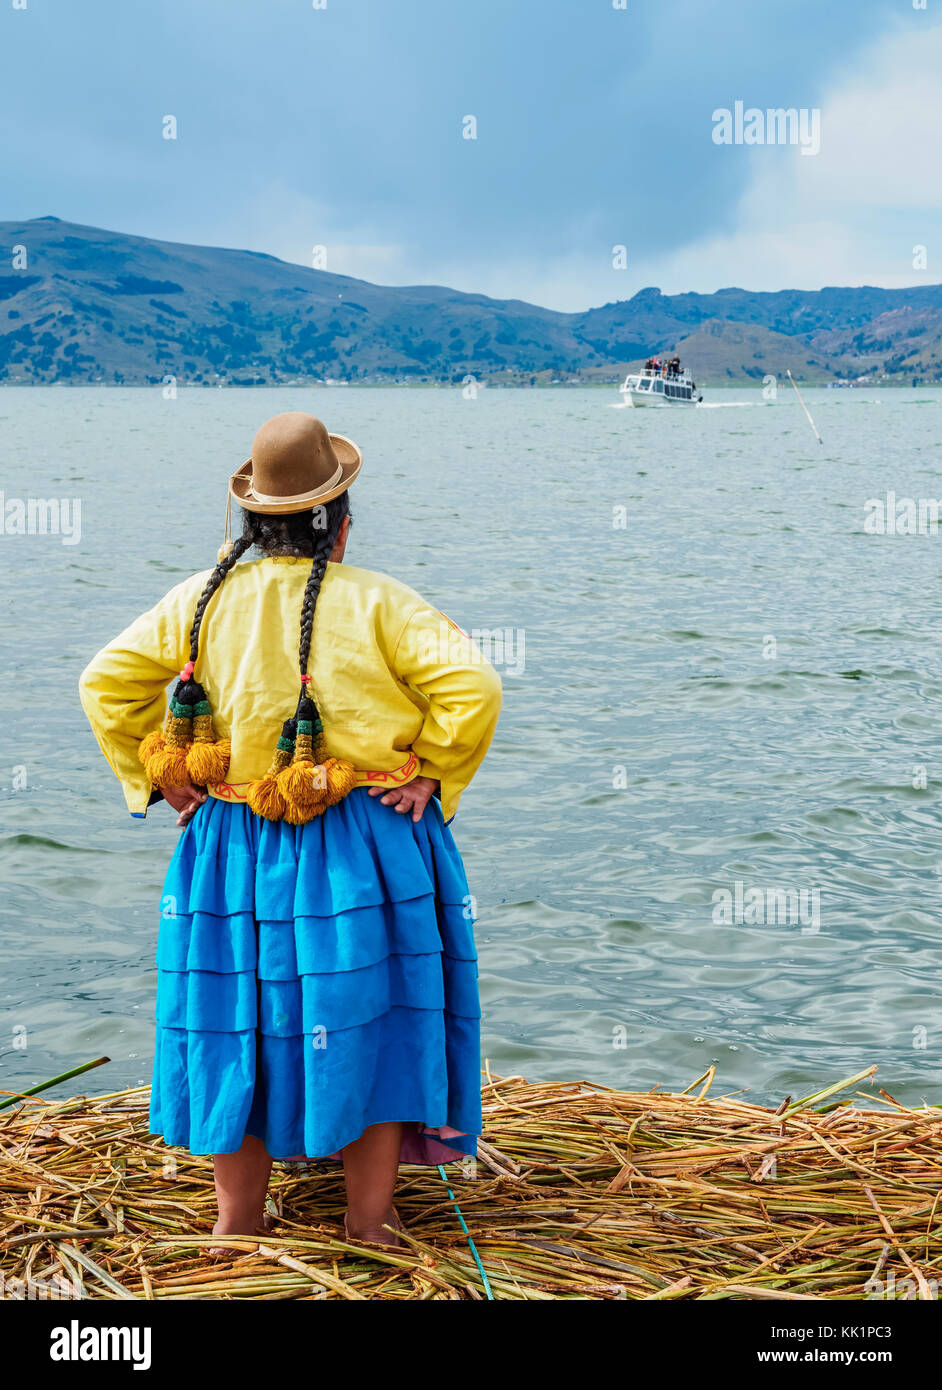 Native Uro Lady waiting for the boat with tourists, Uros Floating Islands, Lake Titicaca, Puno Region, Peru Stock Photo